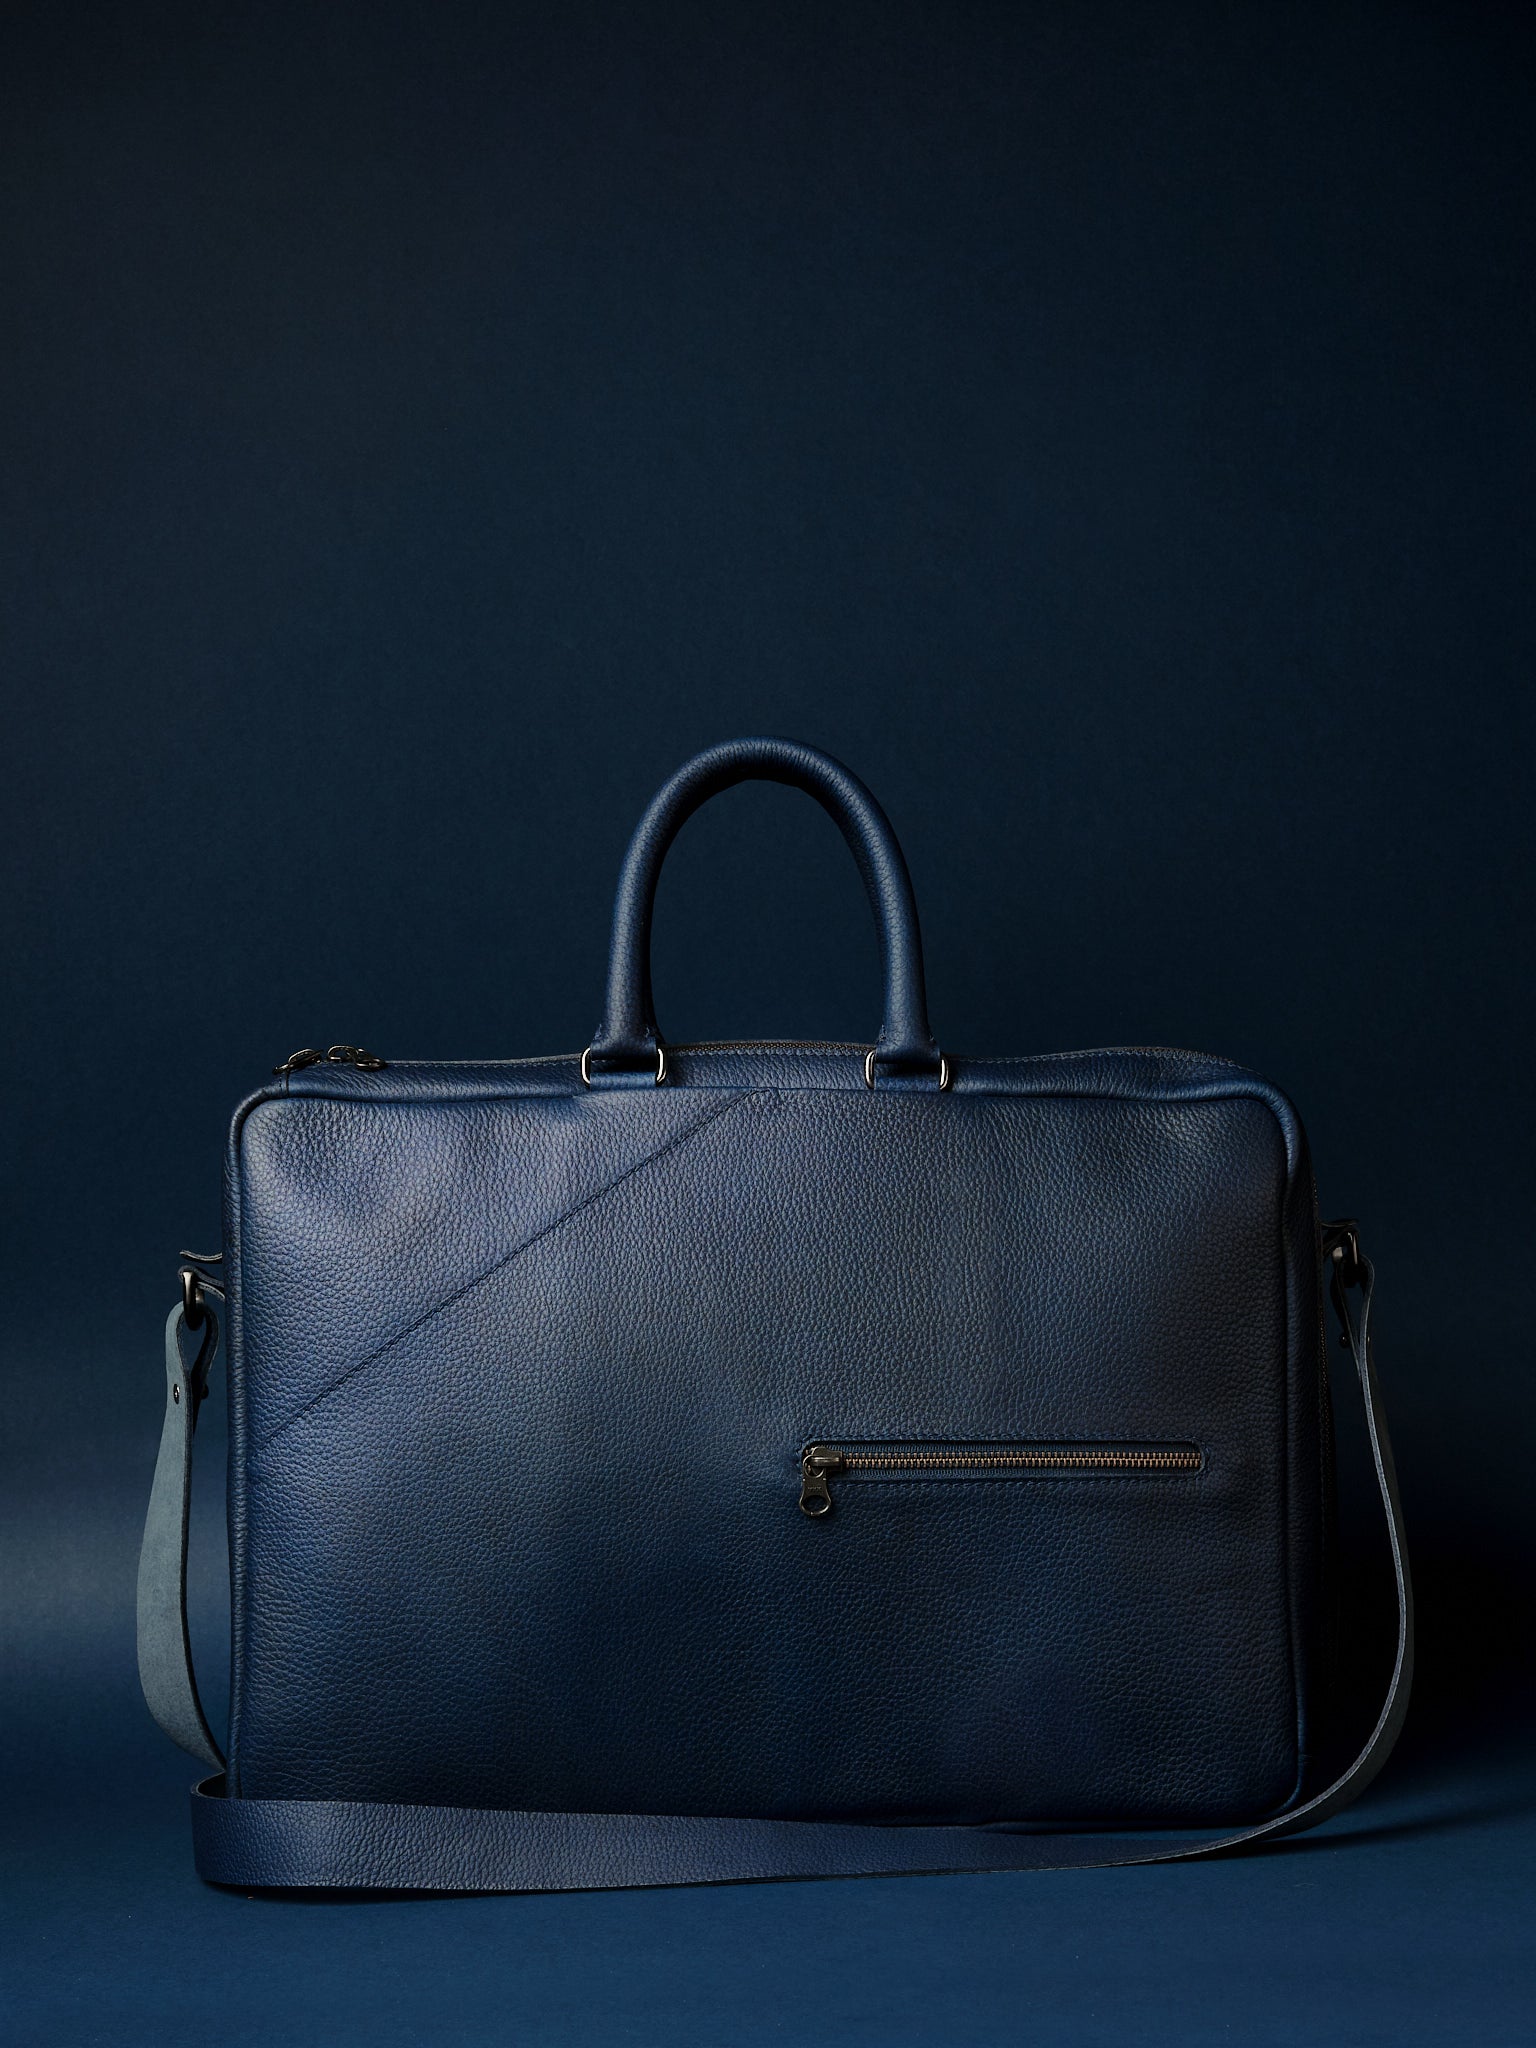 Front zip pocket. Leather Briefcase for Men. Briefcase Backpack Combination Navy by Capra